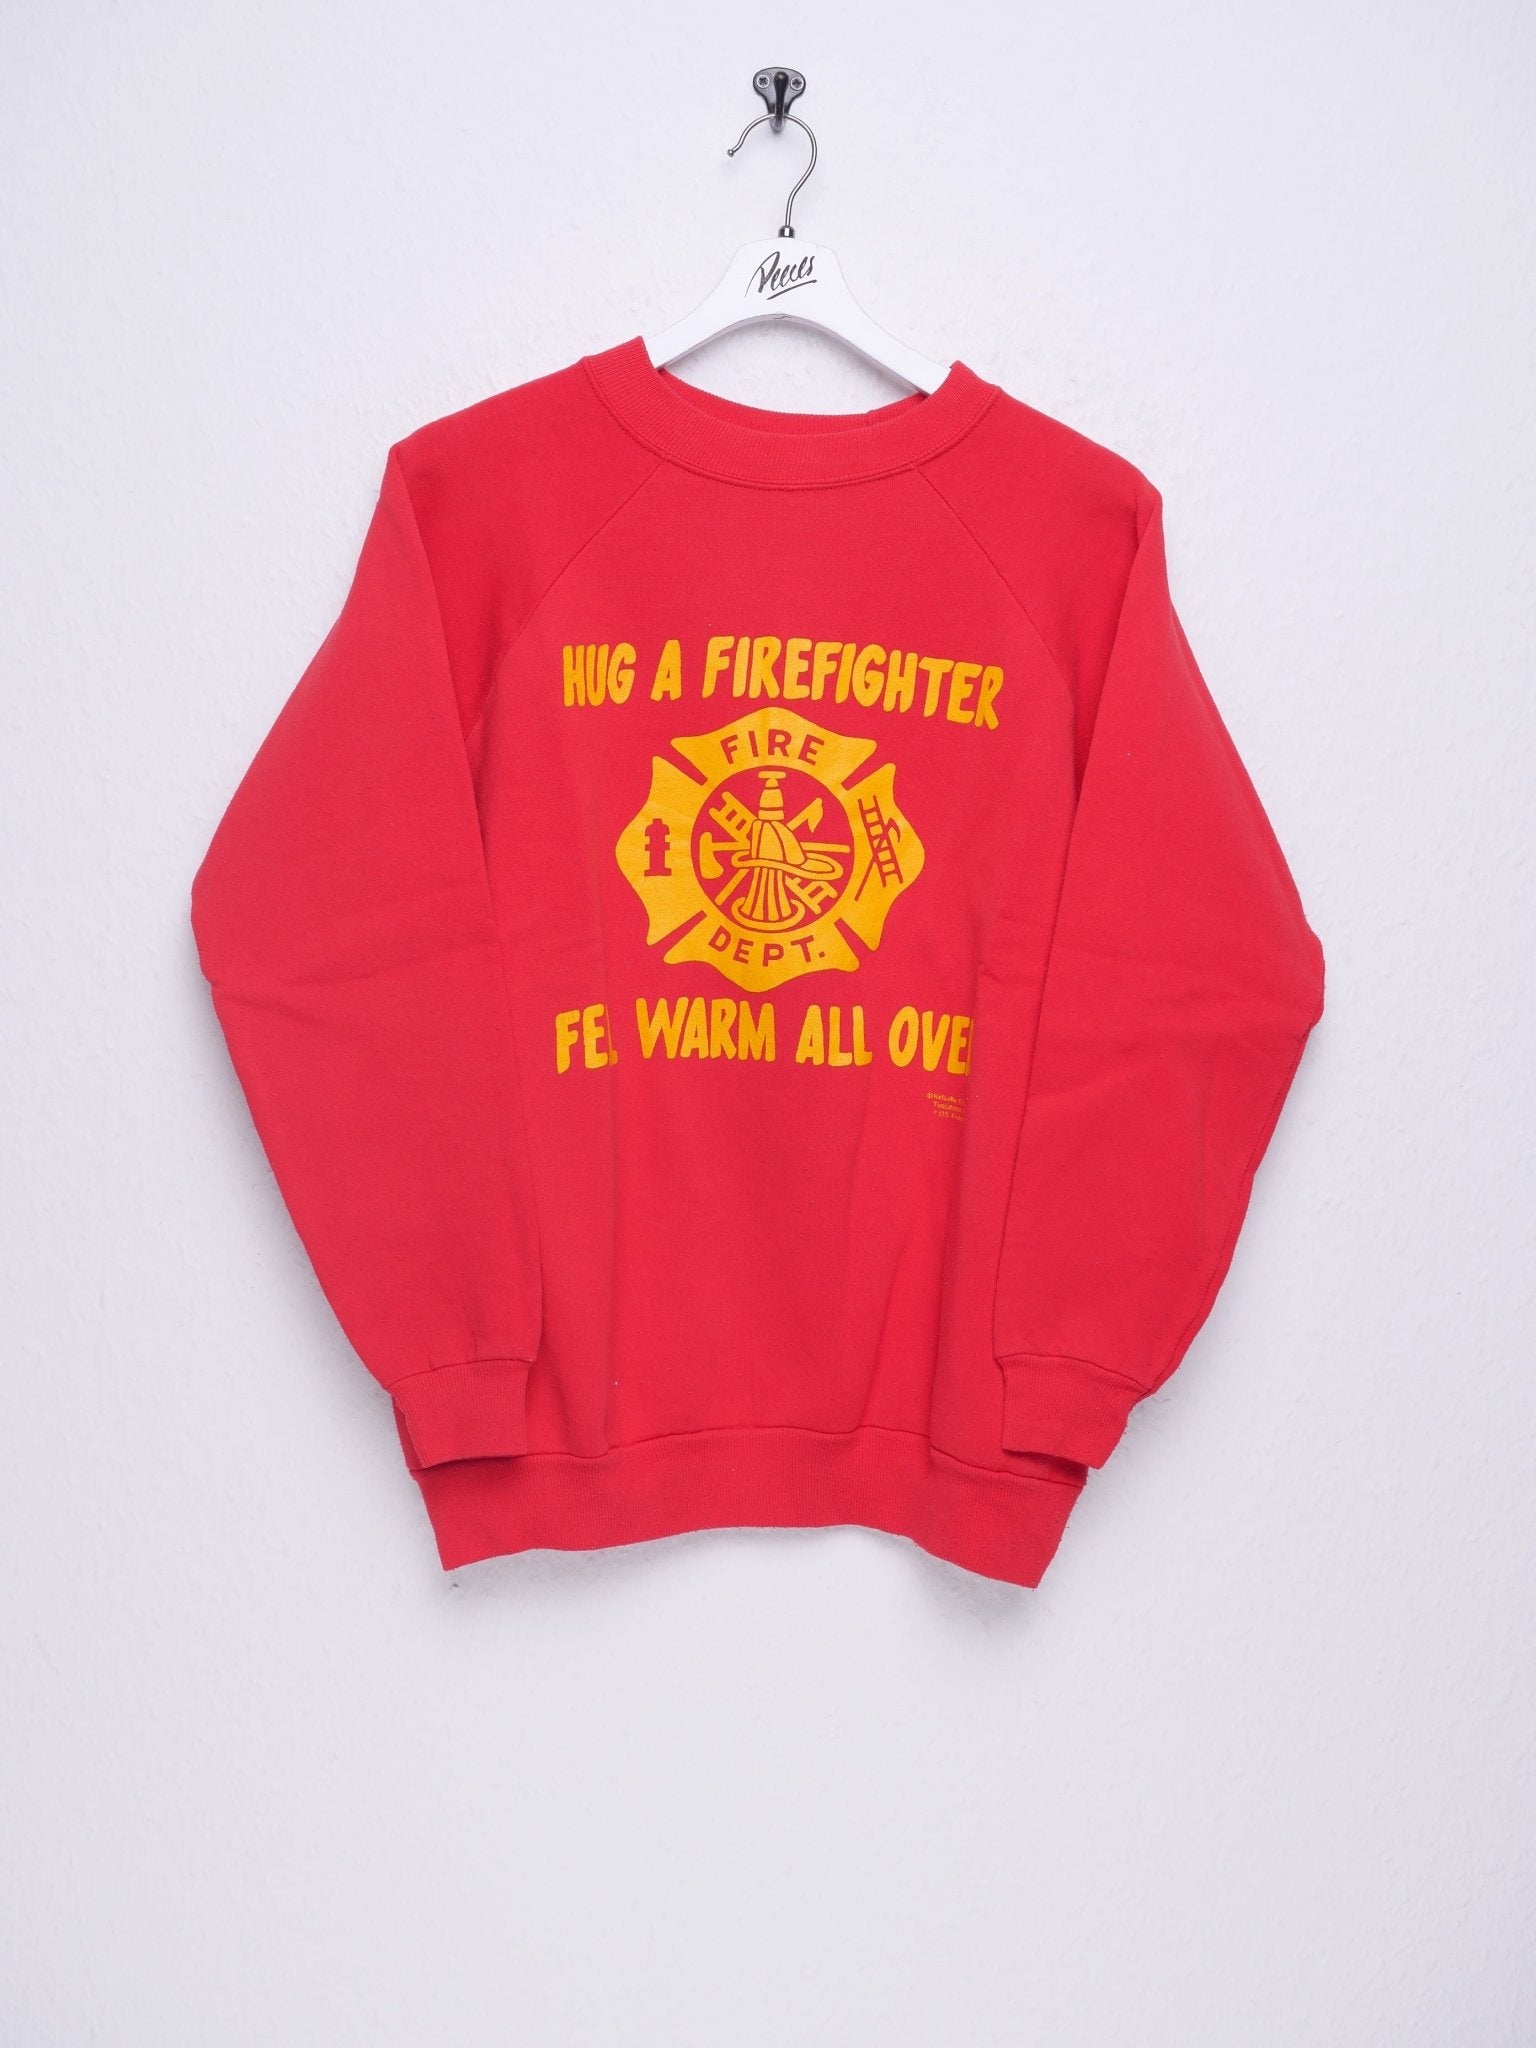 Hug A Firefighter printed Spellout Sweater - Peeces